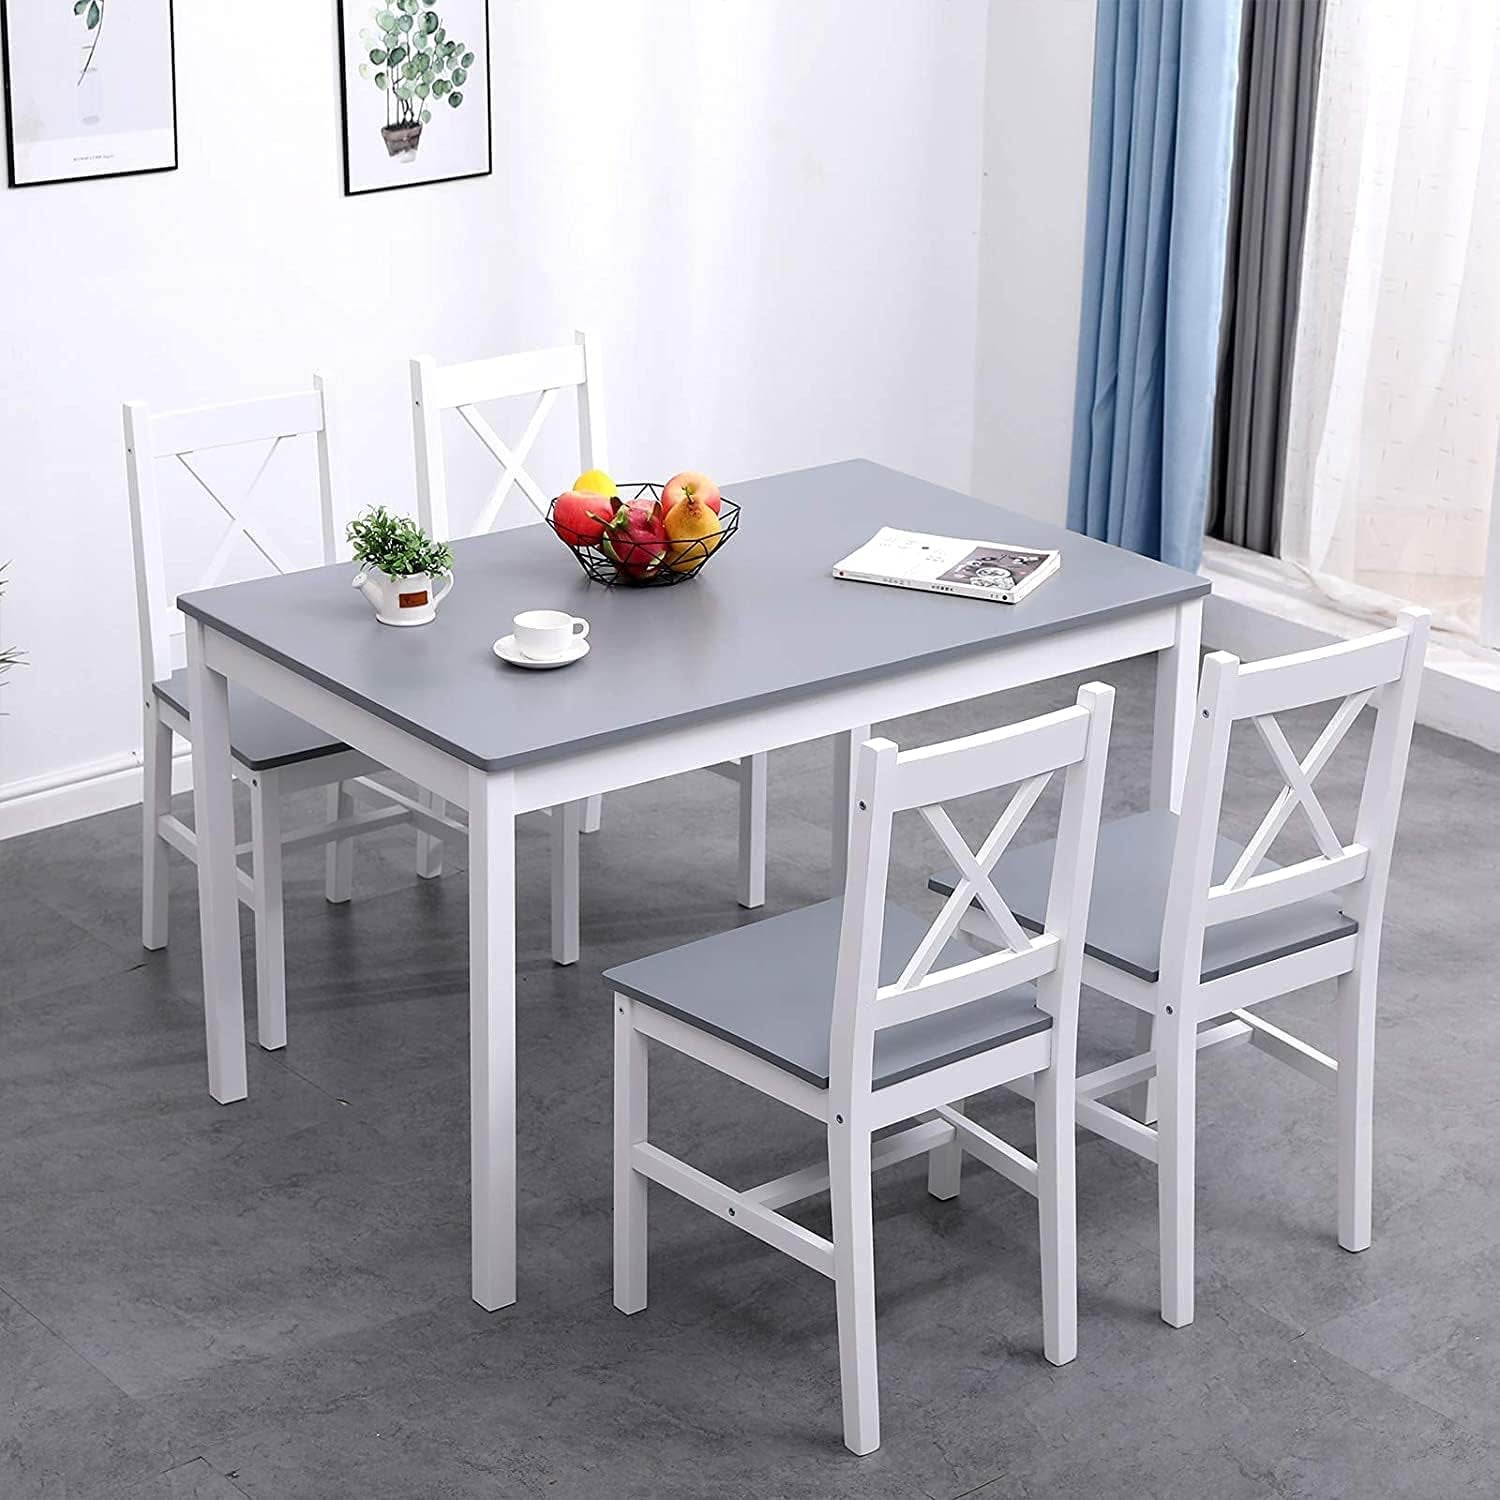 4-Person Dining Table Set 5 Pieces, Wood Kitchen Table Set with 4 Chairs for Kitchen Dining Room Restaurant, Grey and White